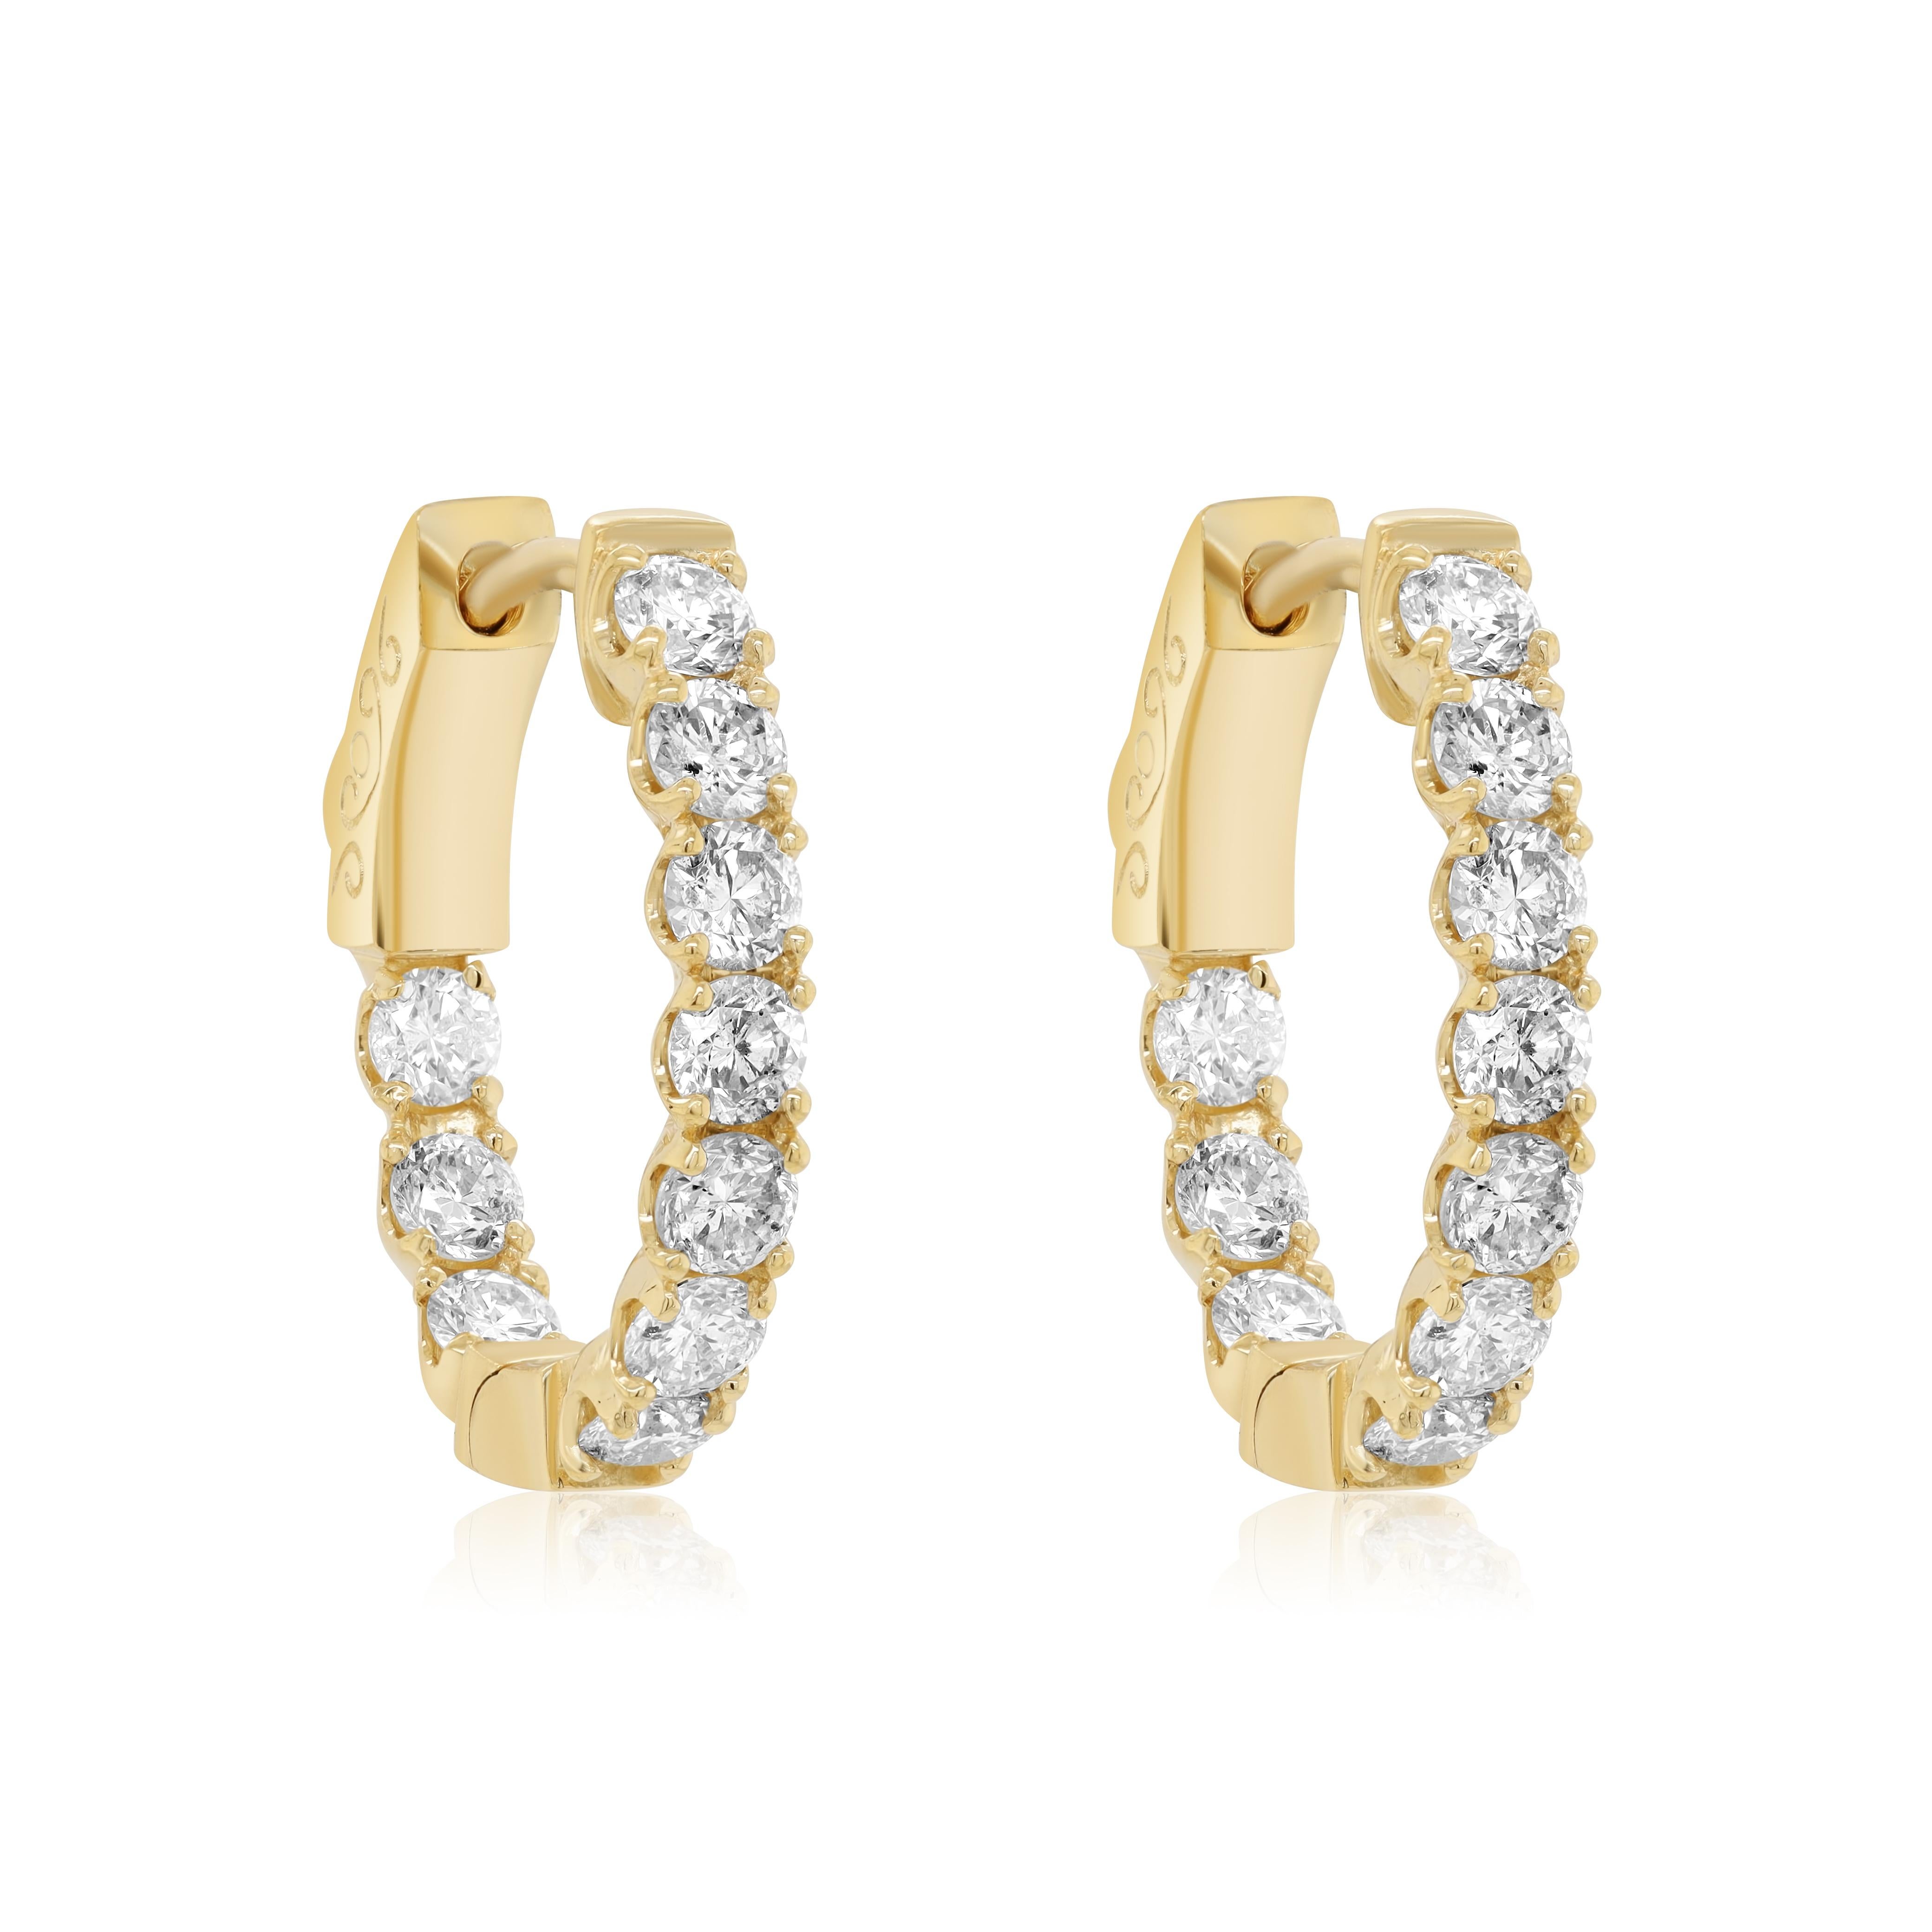 14KT YELLOW GOLD, DIAMOND OVAL HOOPS FEATURES 1.65cts OF DIAMONDS. 20 STONES
Diana M. is a leading supplier of top-quality fine jewelry for over 35 years.
Diana M is one-stop shop for all your jewelry shopping, carrying line of diamond rings,